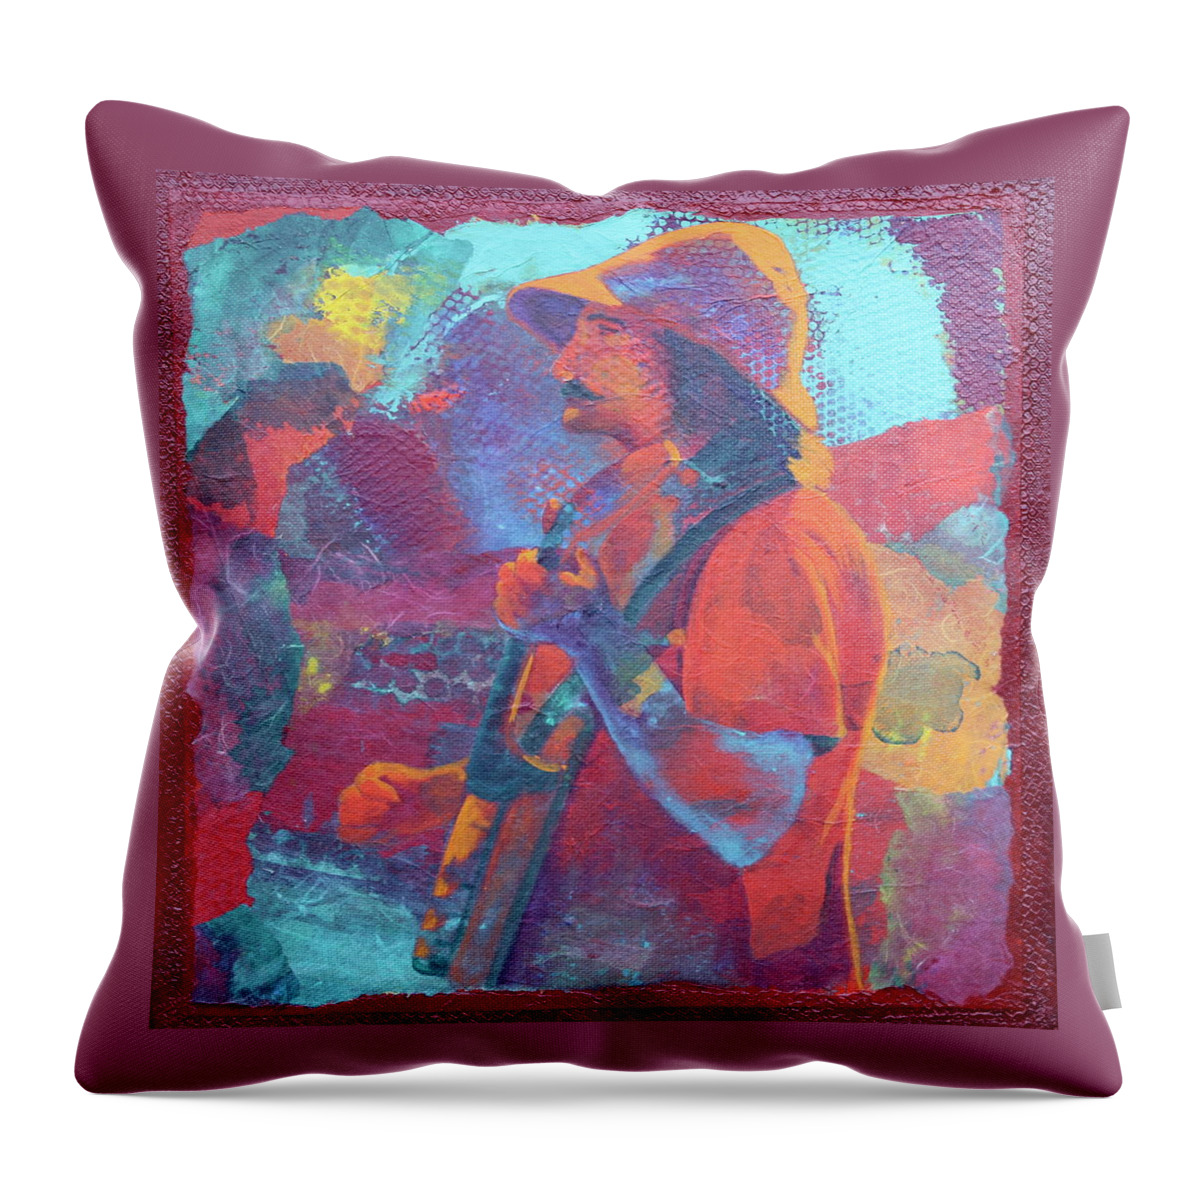 Banjo Player Throw Pillow featuring the painting The Banjo Player by Nancy Jolley